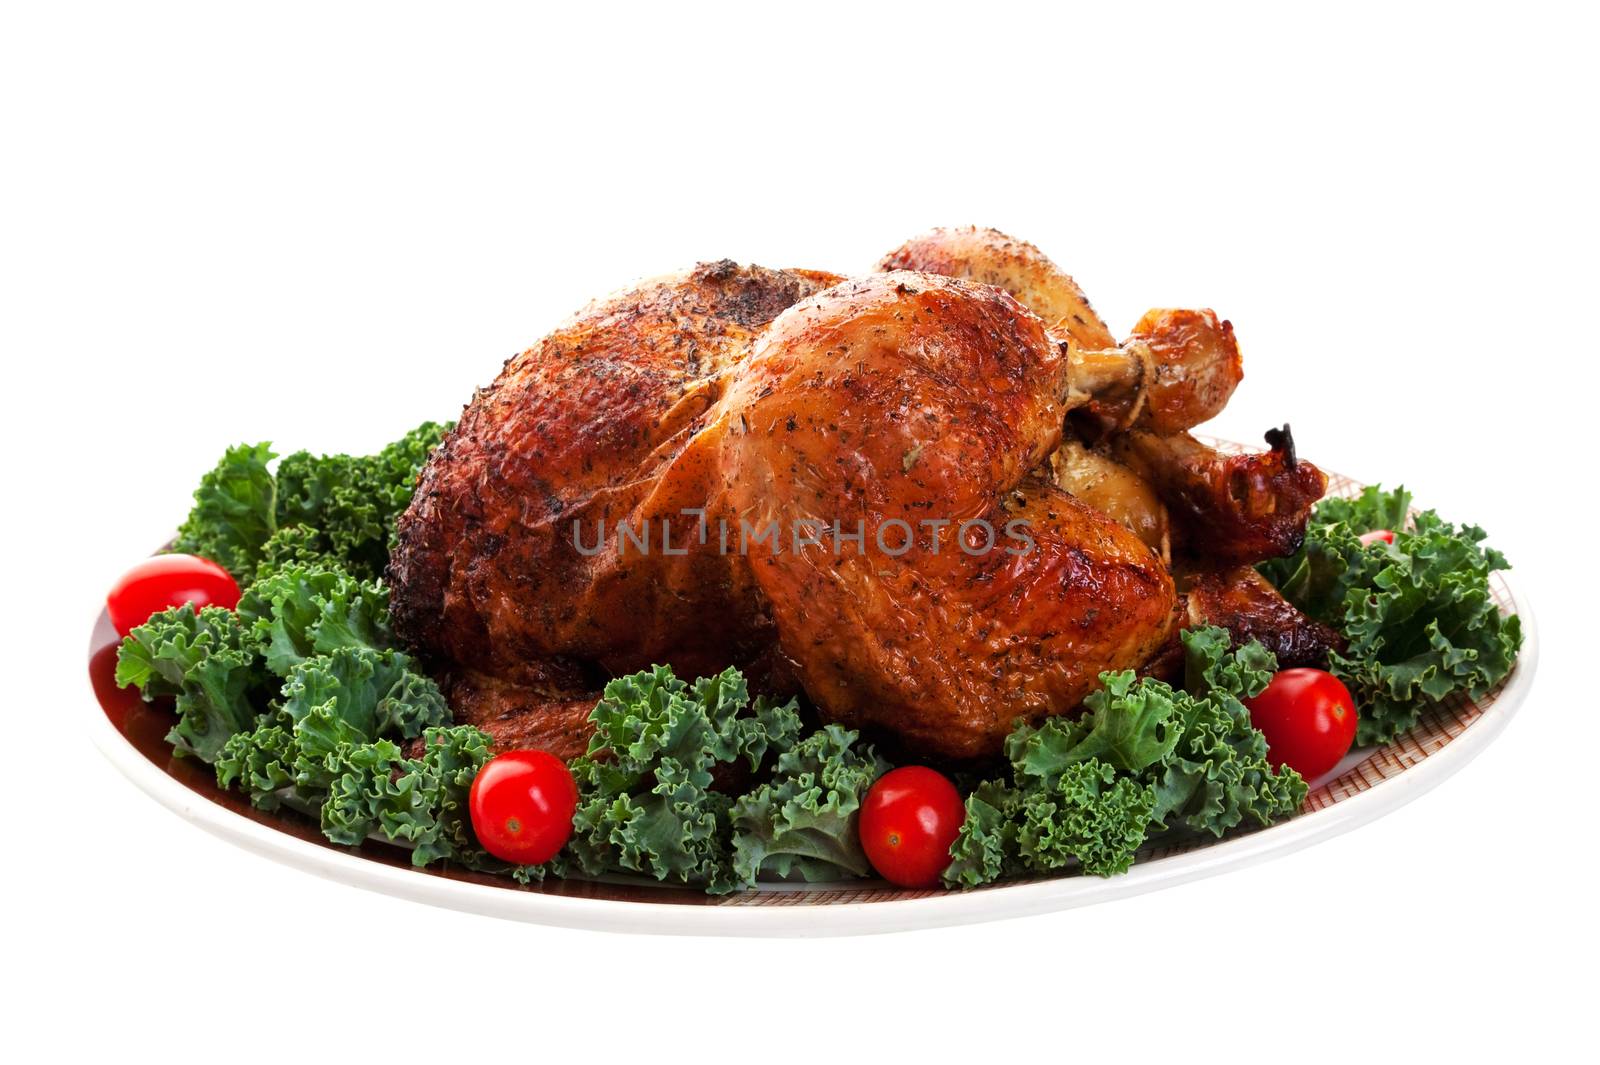 A beautiful roasted chicken on a garnished platter.  Shot on white background.